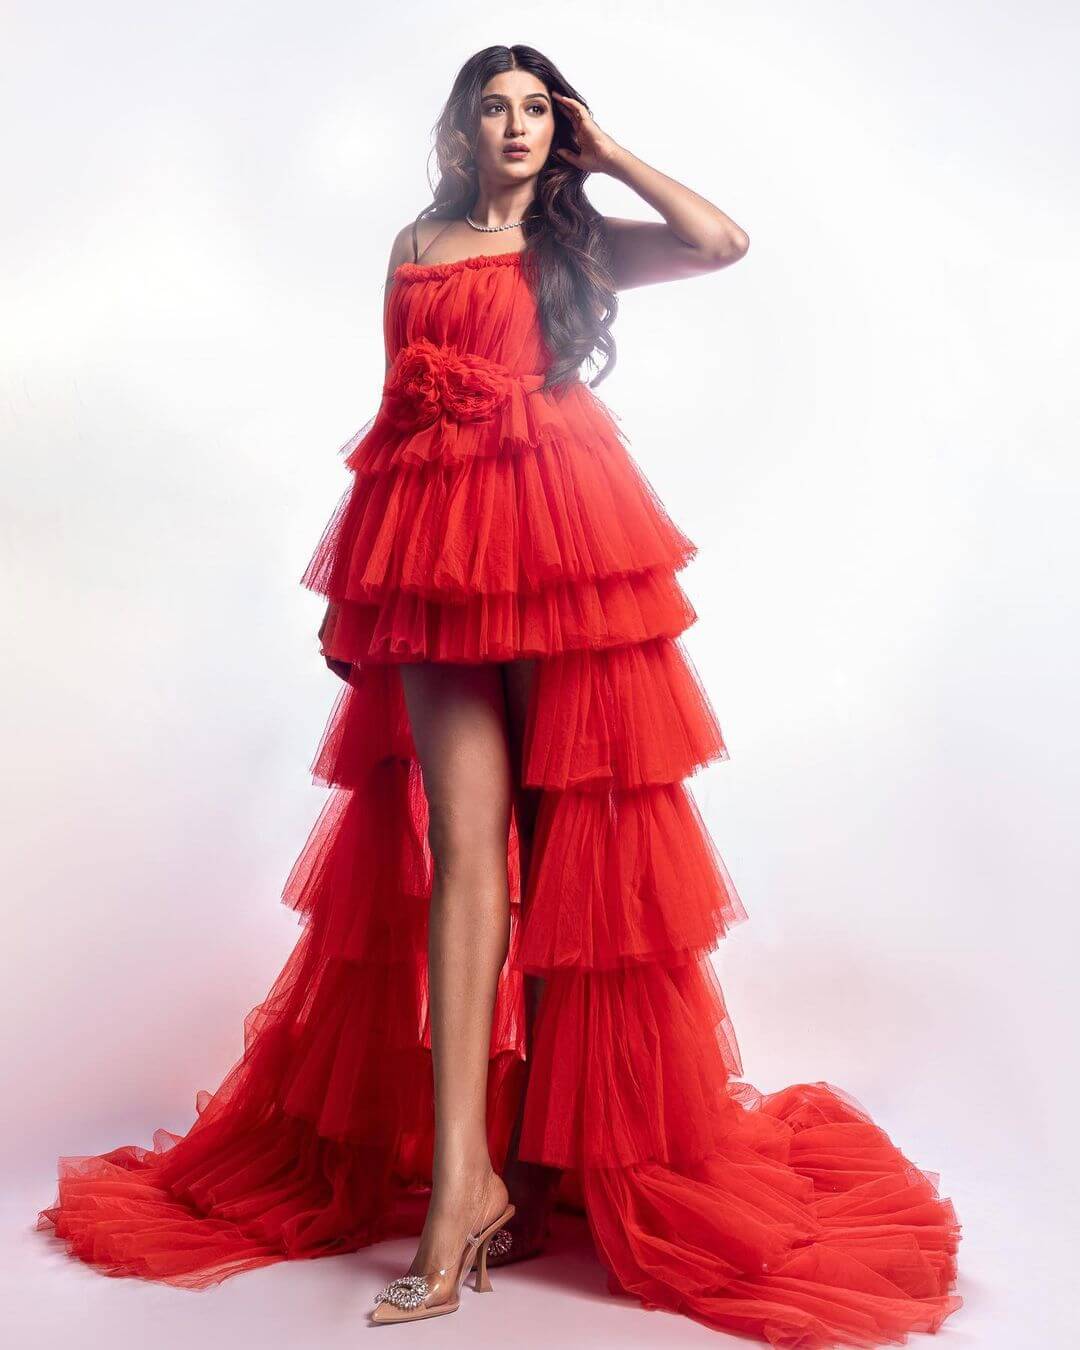 Big Boss 16 Fame Nimrit Kaur Ahluwalia In Red Off Shoulder Multi-Layer Waterfall Gown